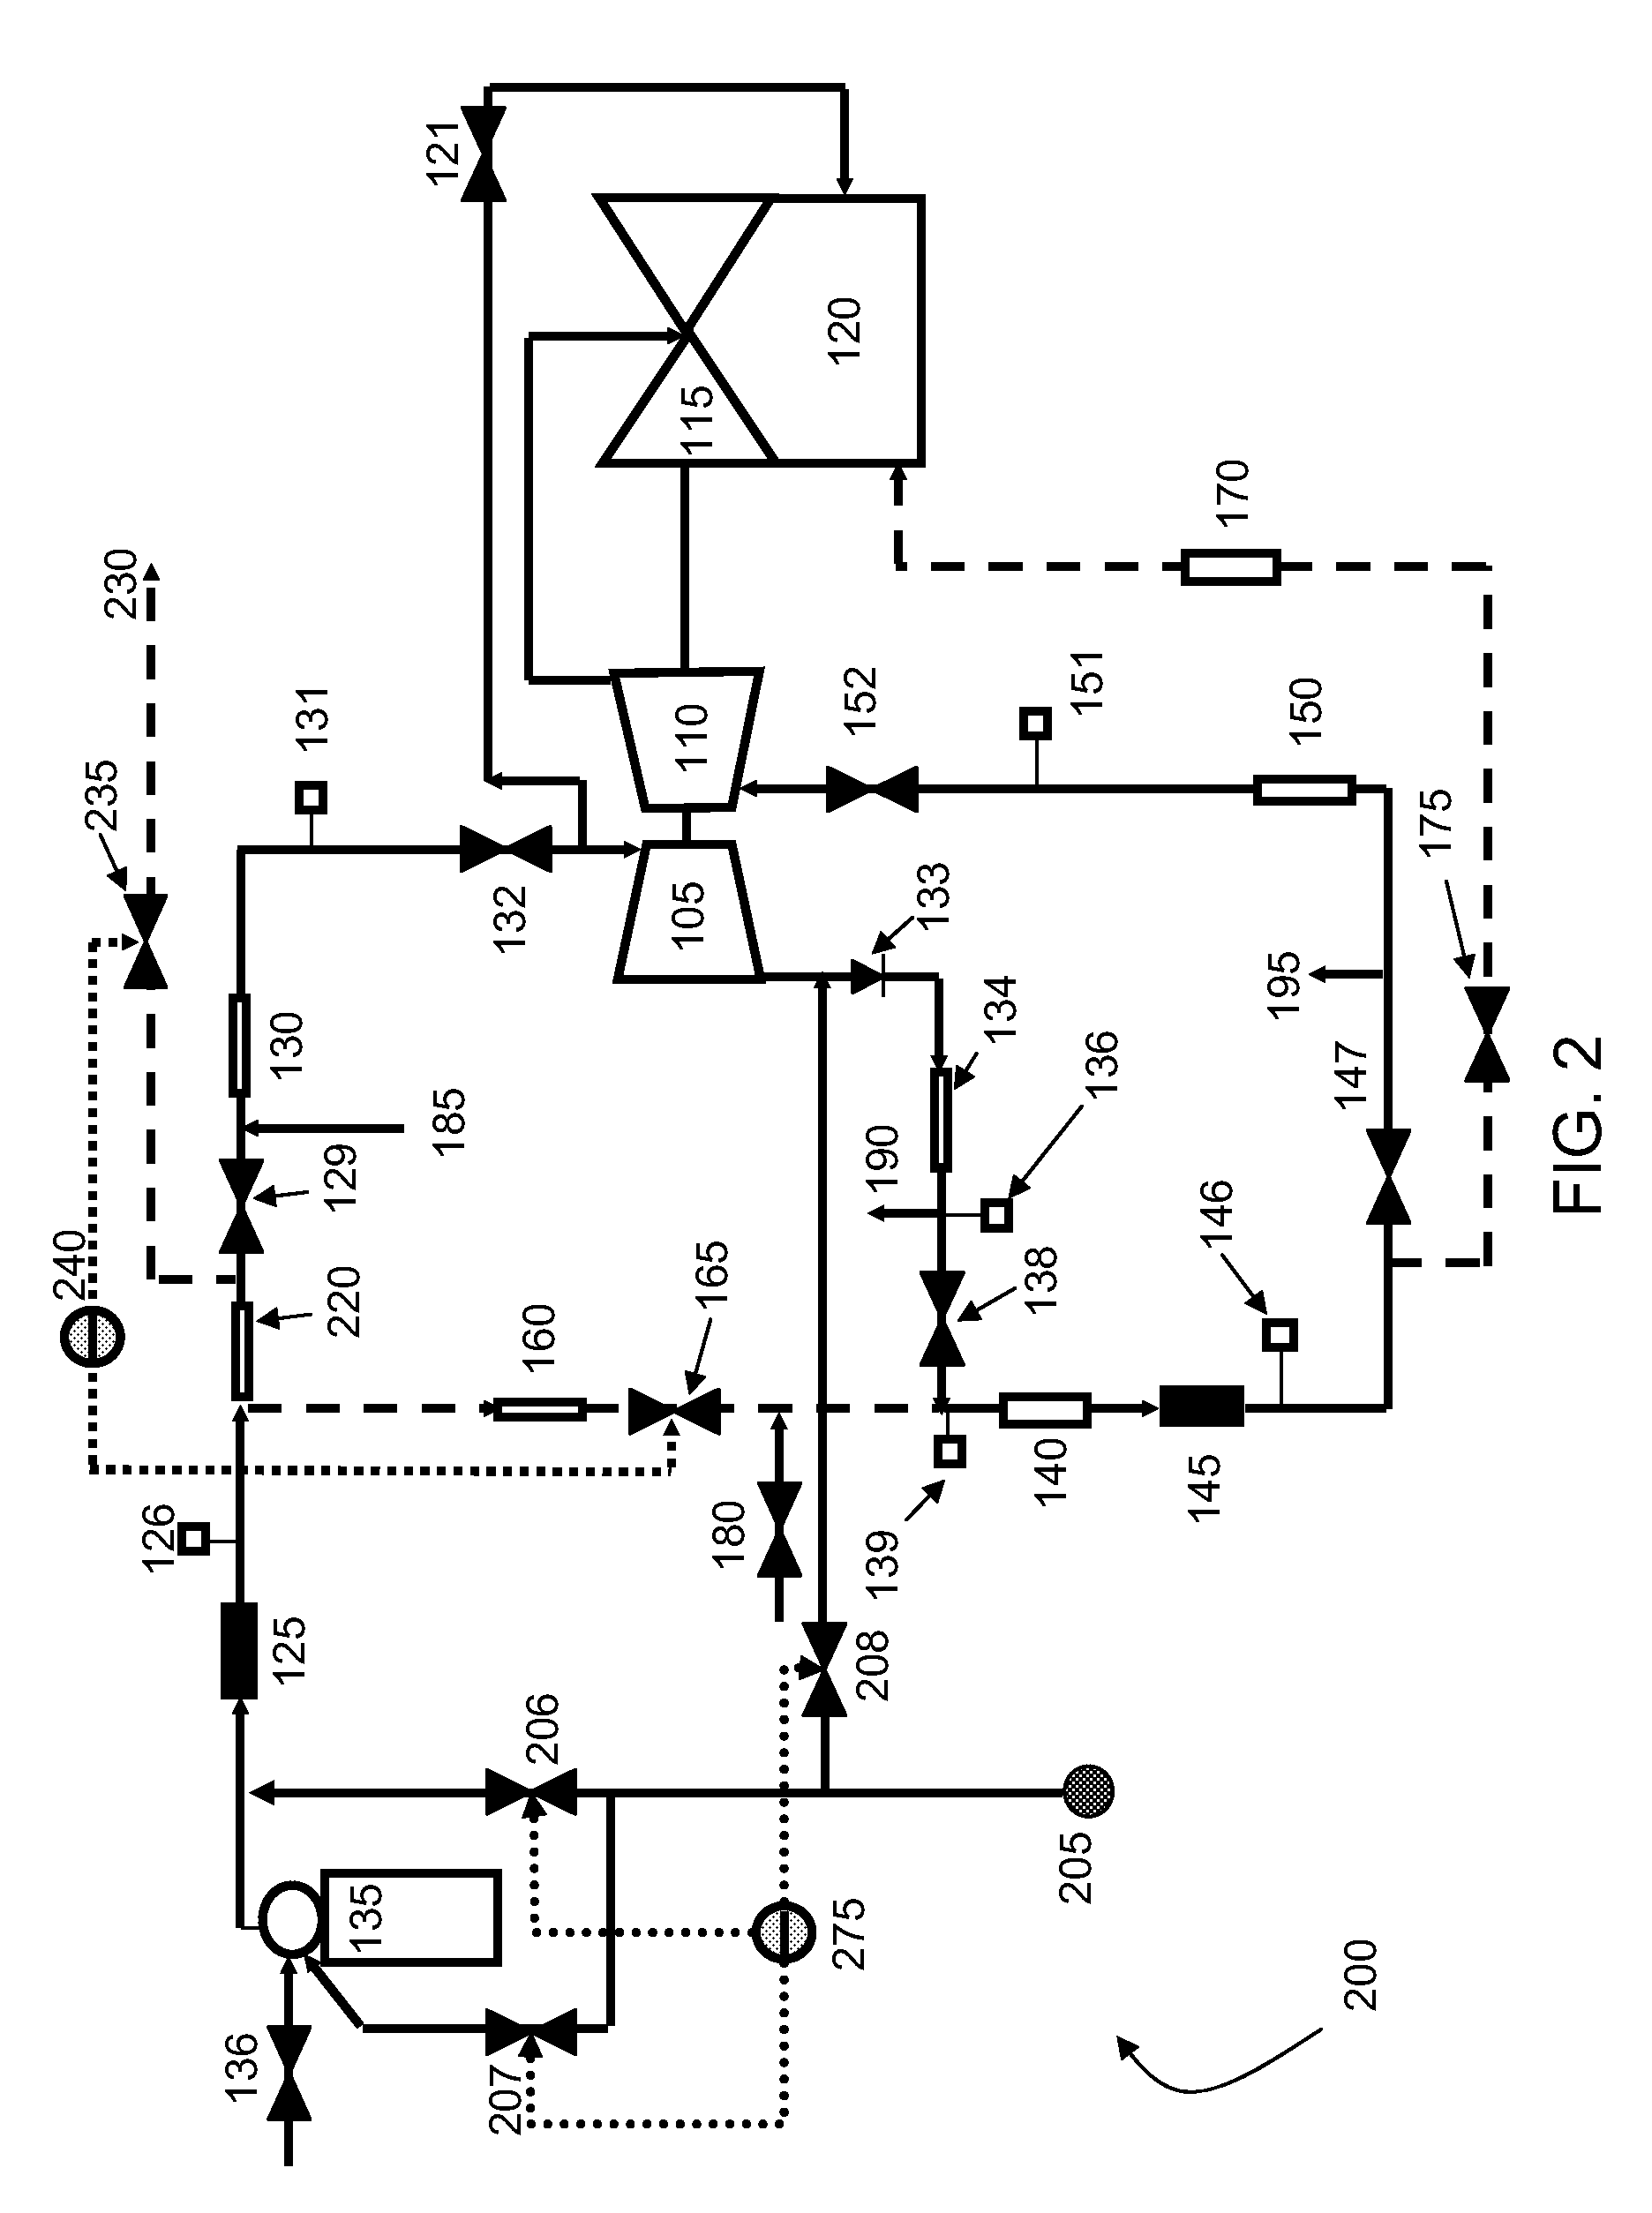 Systems and Methods for Pre-Warming a Heat Recovery Steam Generator and Associated Steam Lines